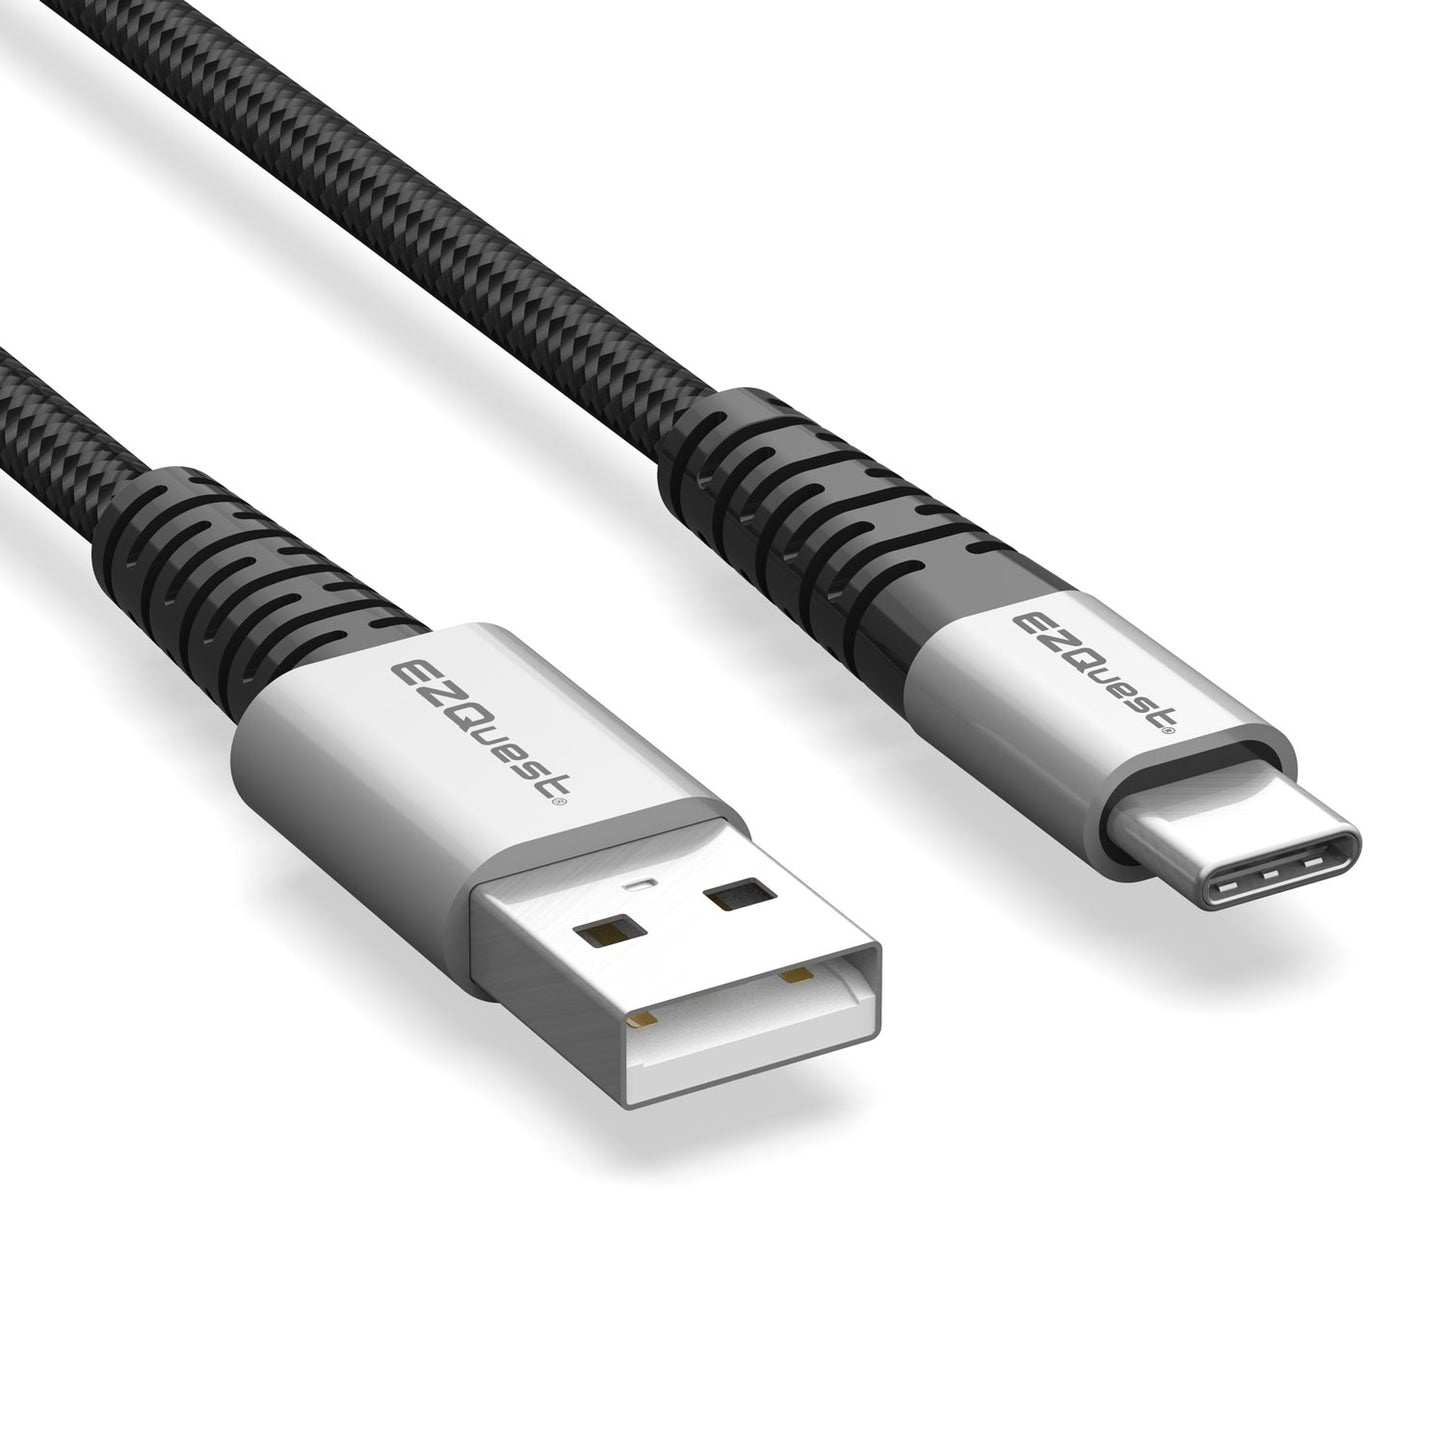 EZQuest USB-C to USB 3.0 Cable - 1 Meter